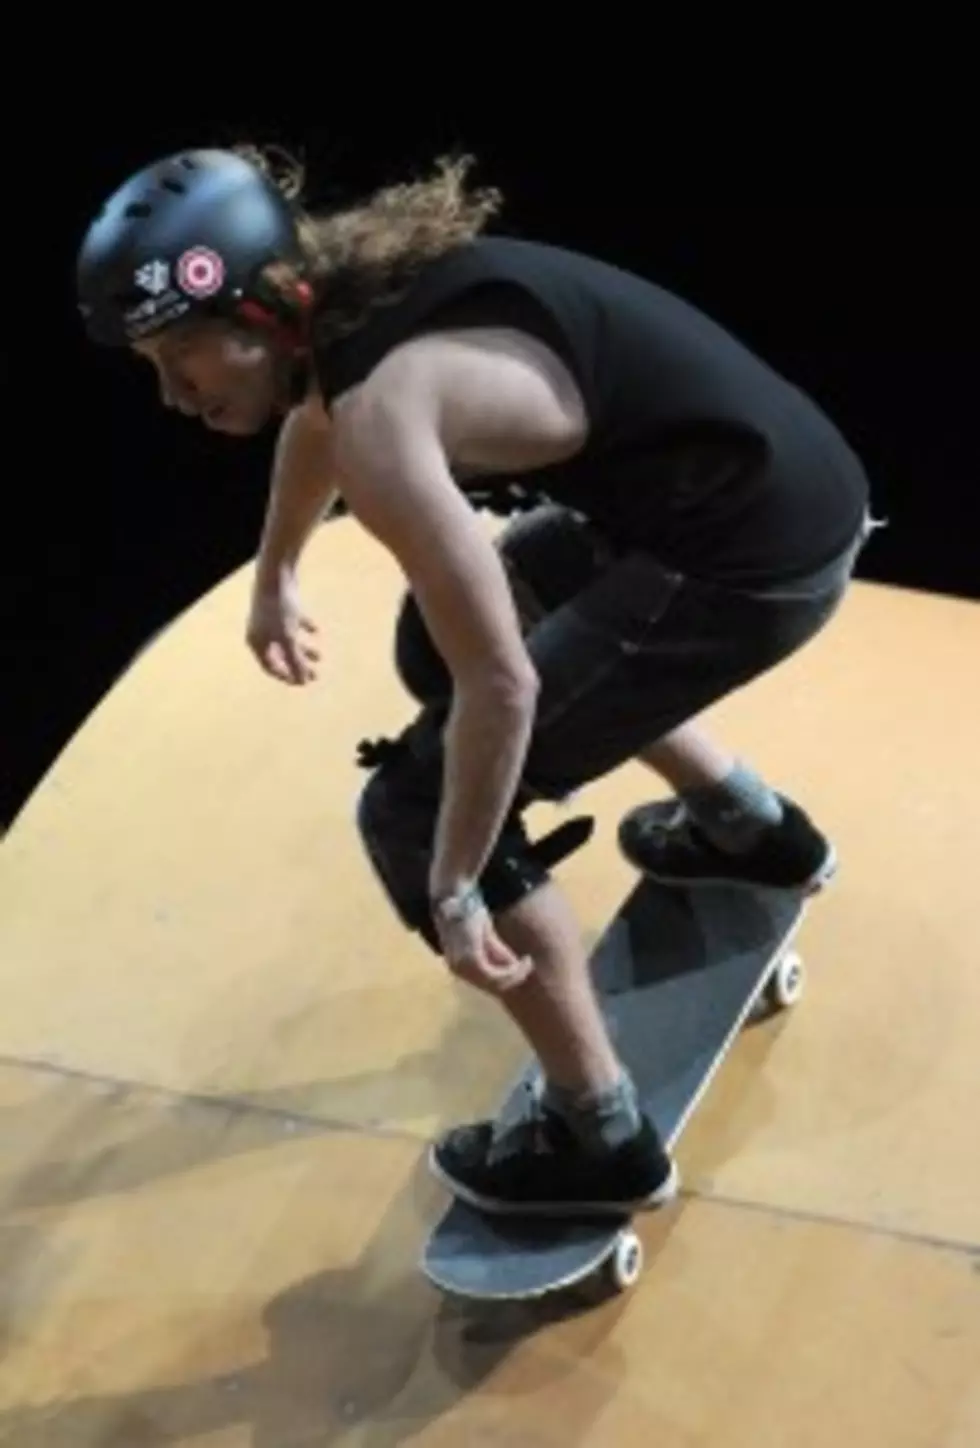 How Old is too Old to Ride a Skateboard? [VIDEO]